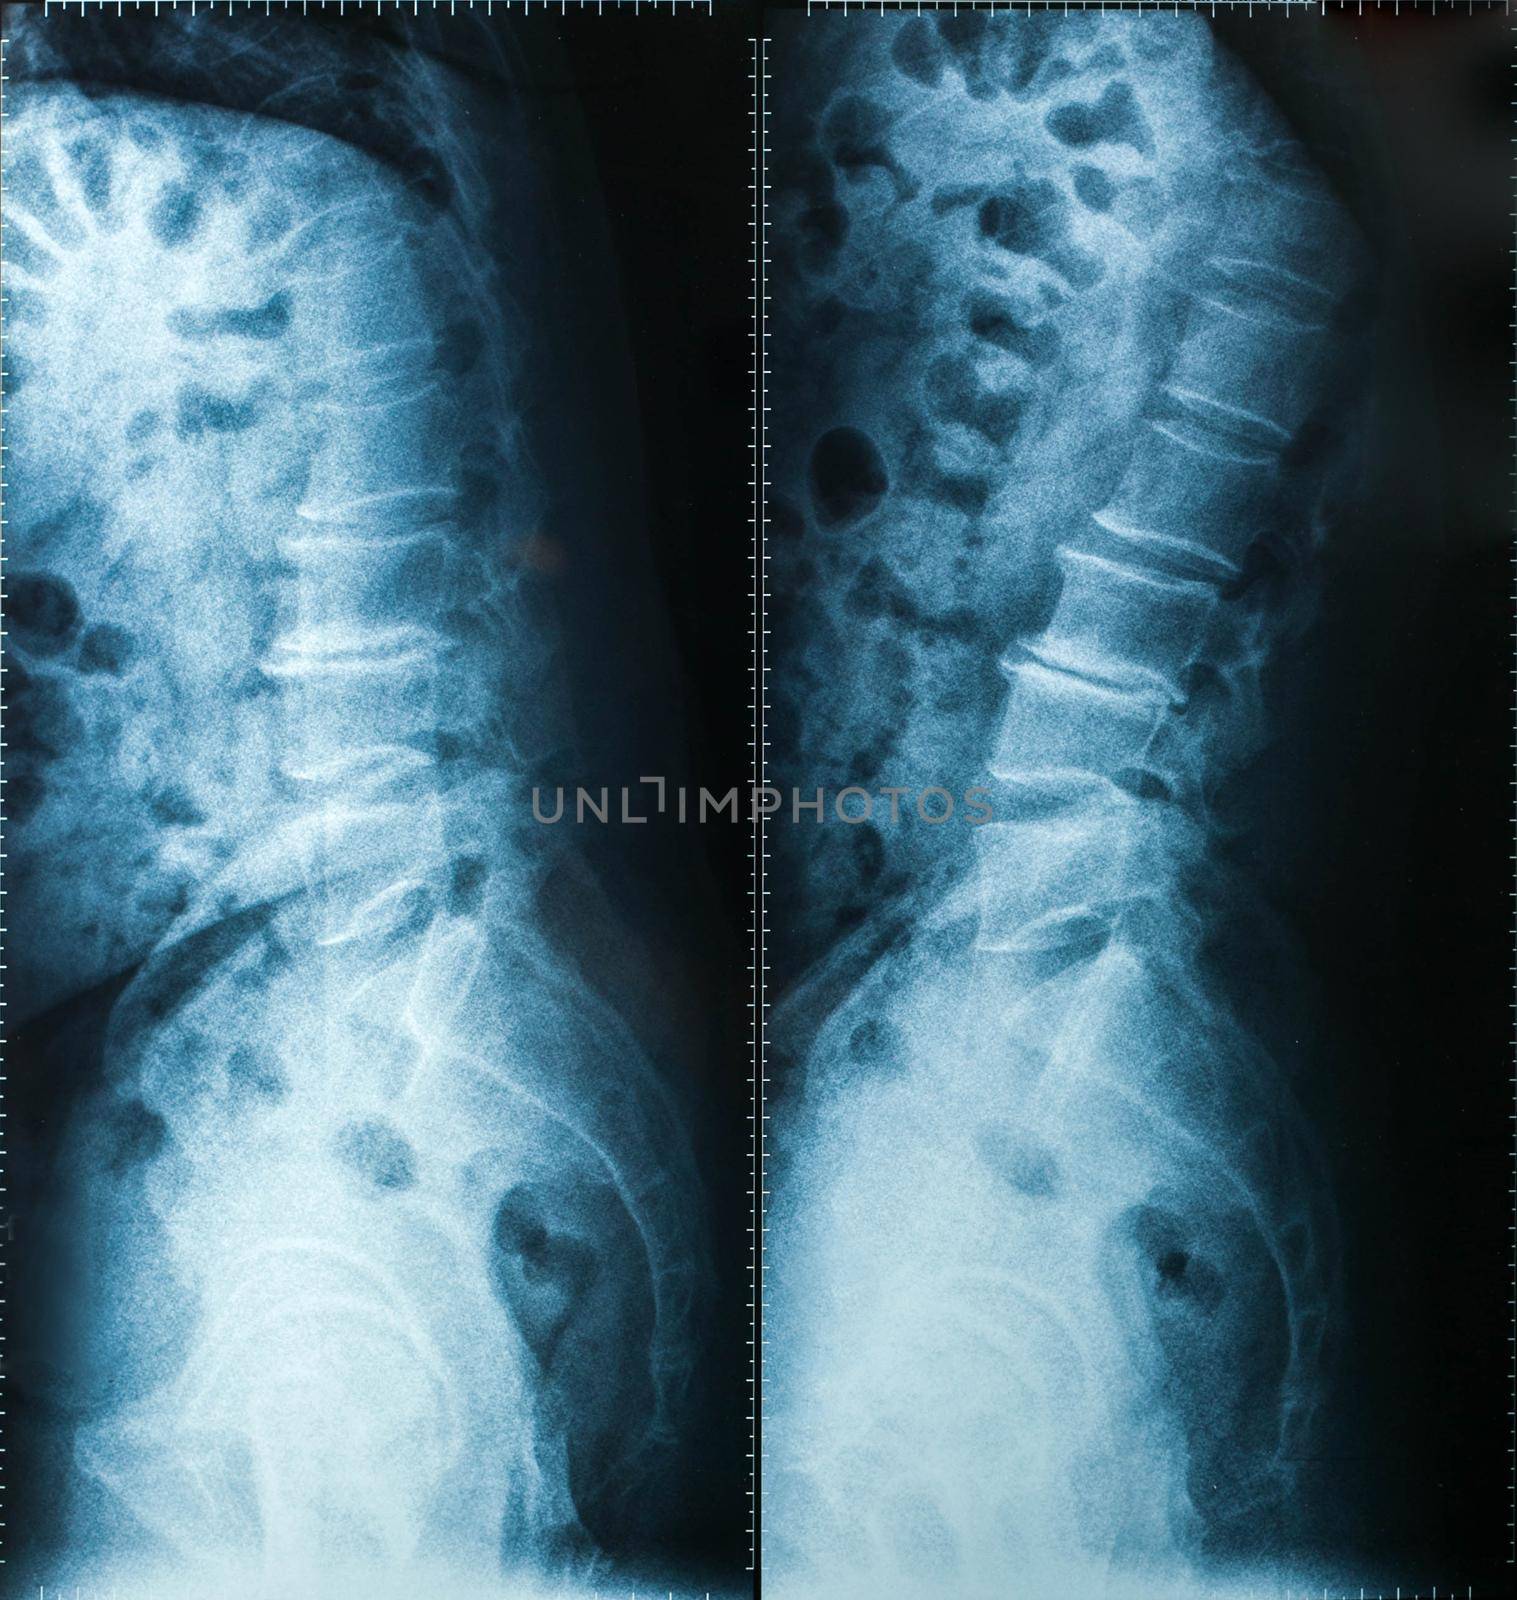 X-Ray image, View of neck men for medical diagnosis. by jayzynism